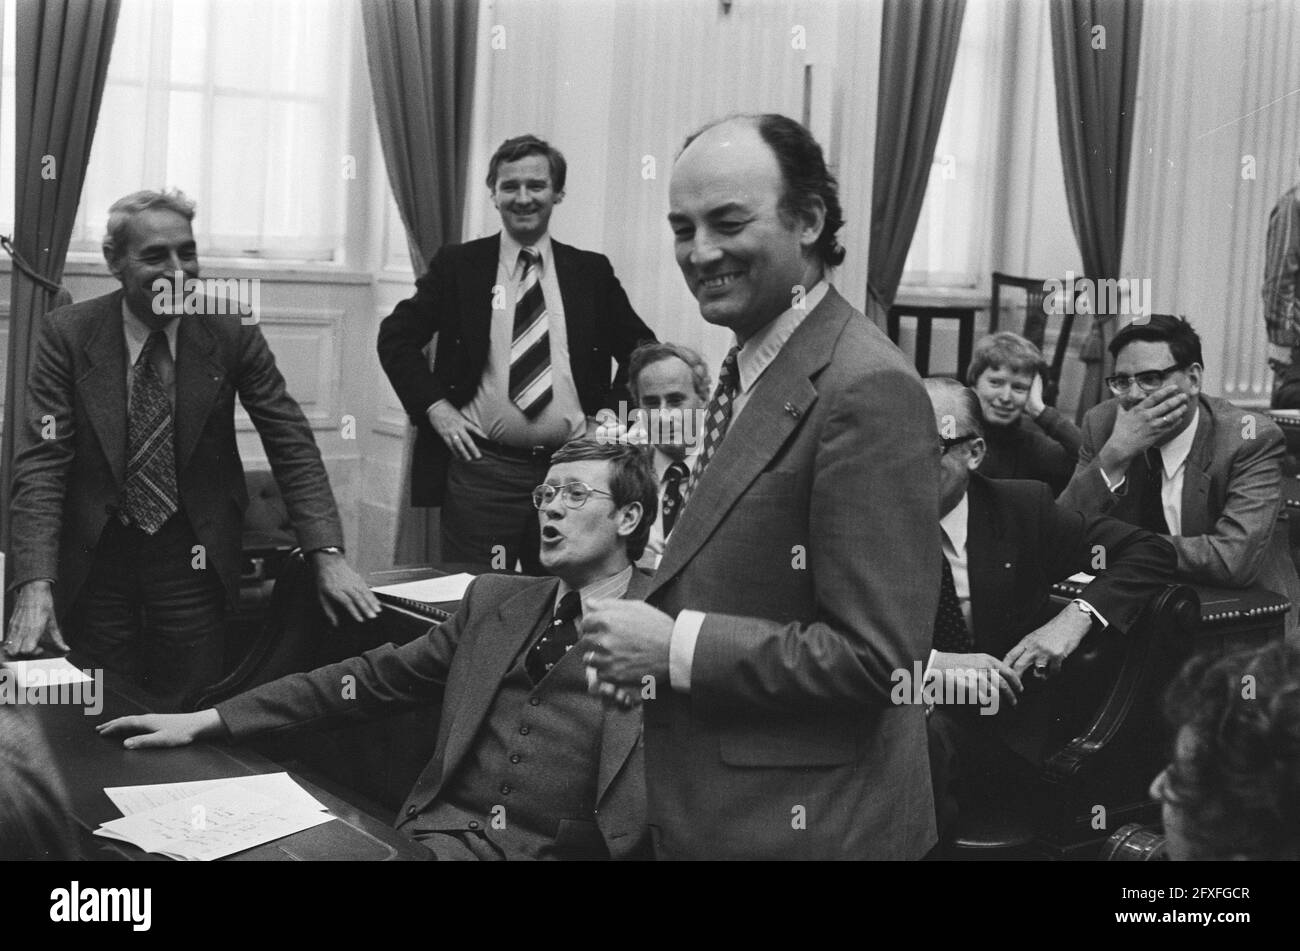 Lower House in connection with debate nuclear order, Aantjes (AR) and Wiegel (VVD), 1 June 1976, politics, The Netherlands, 20th century press agency photo, news to remember, documentary, historic photography 1945-1990, visual stories, human history of the Twentieth Century, capturing moments in time Stock Photo